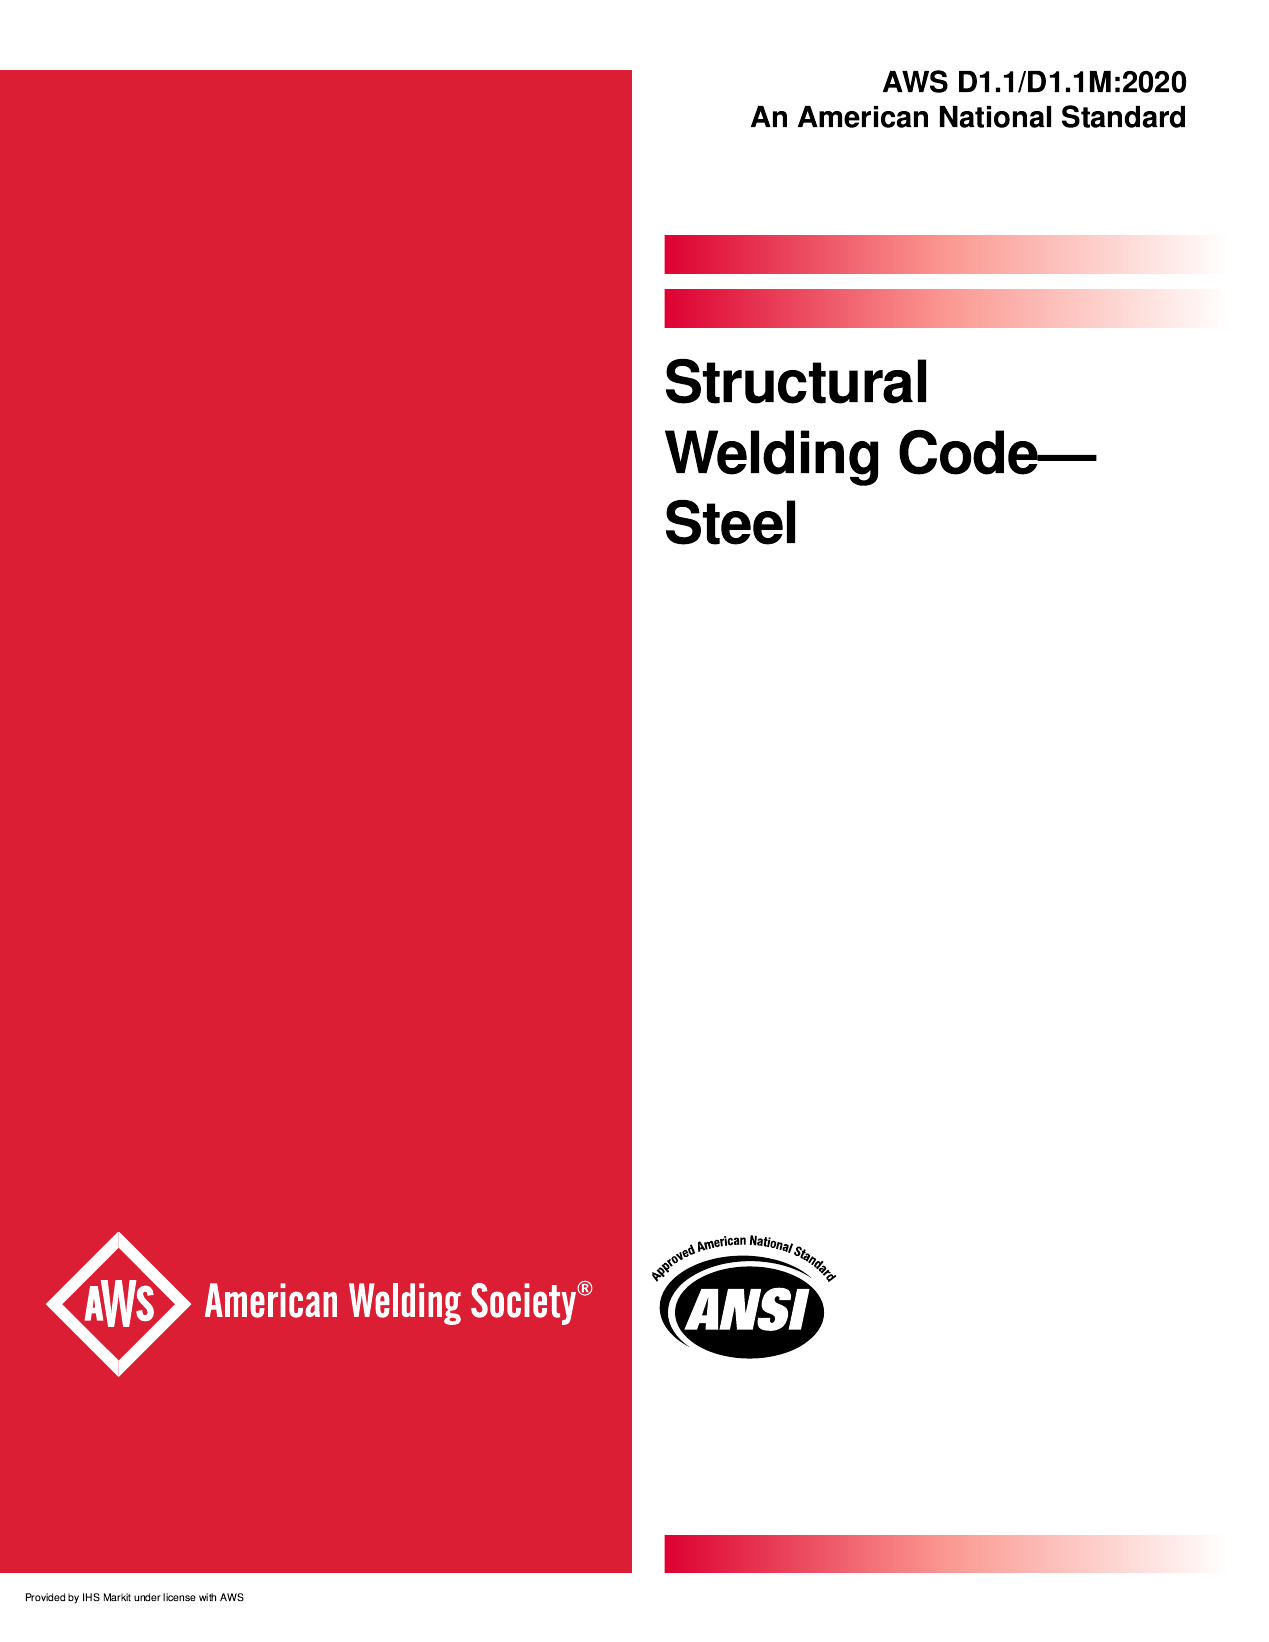 astm a673 free download